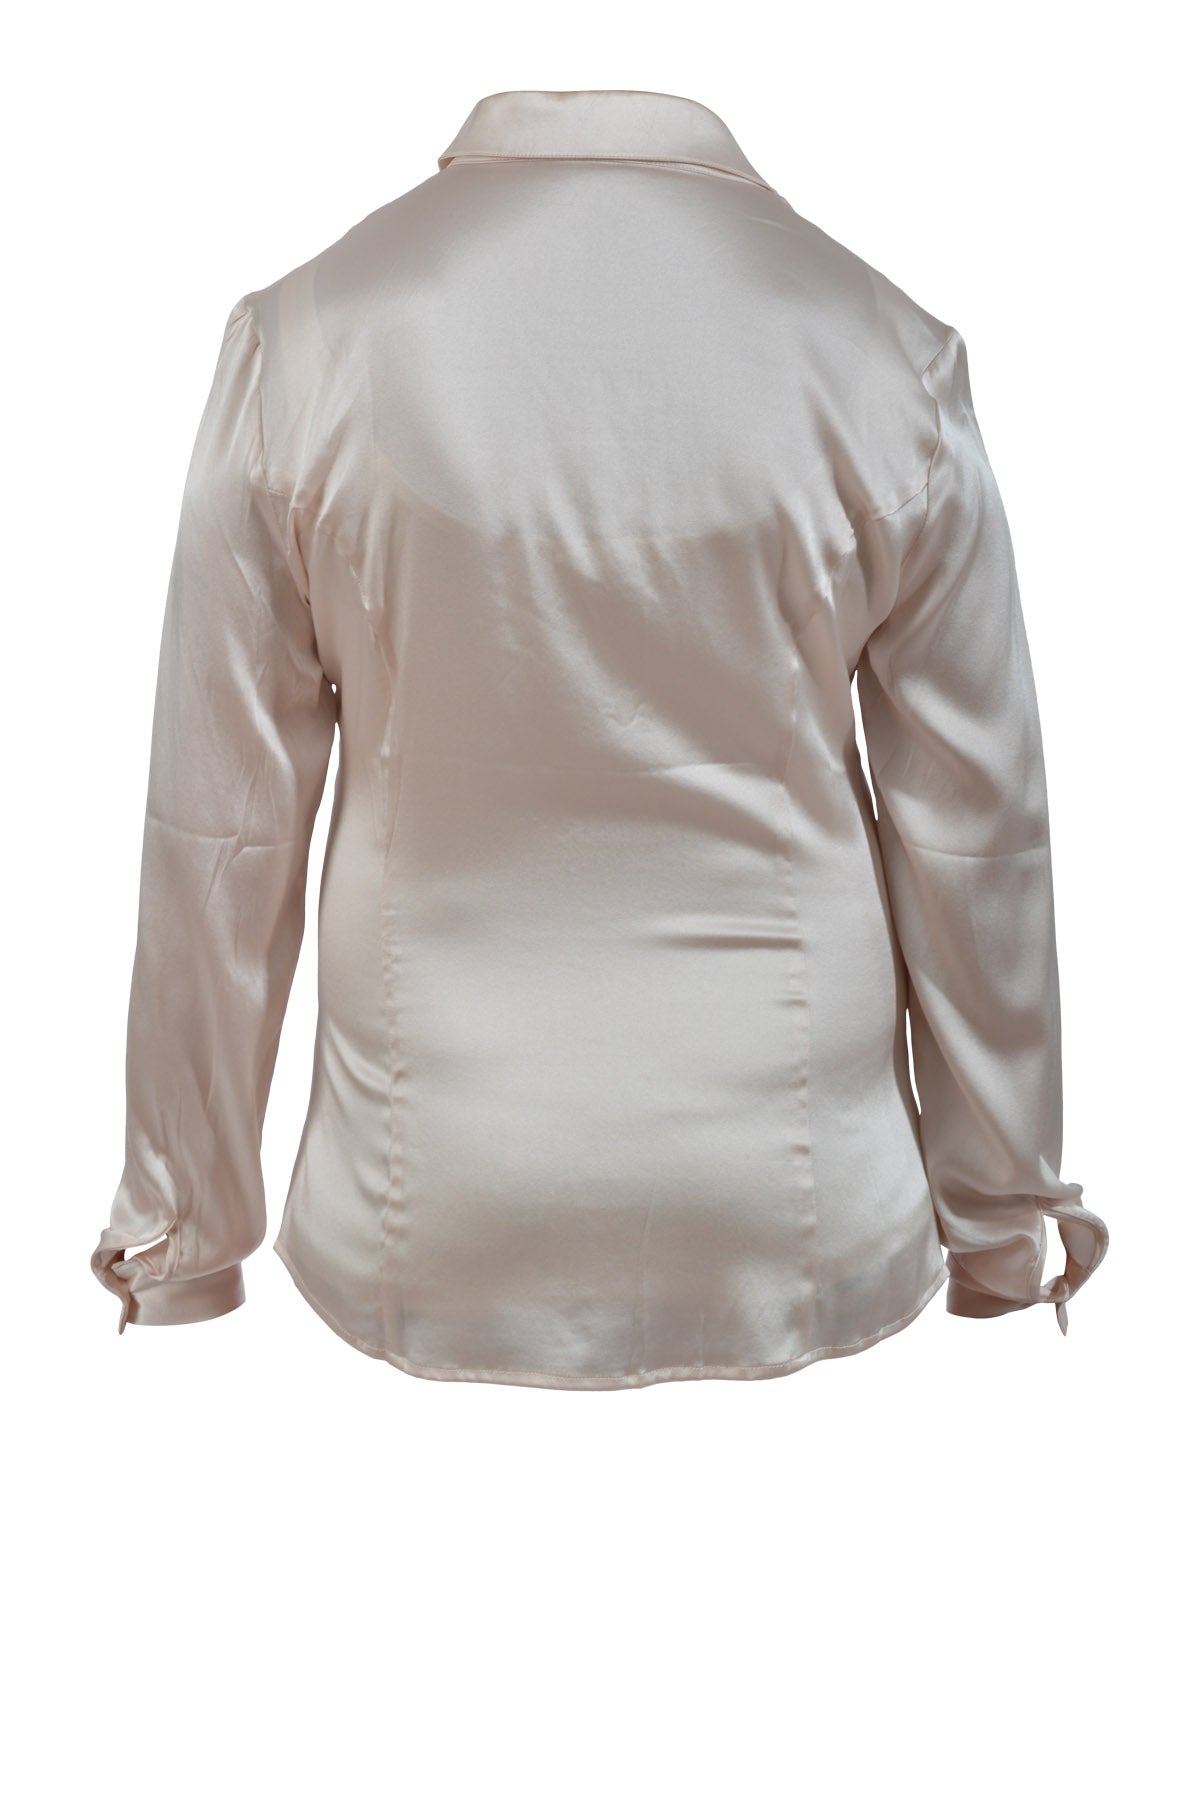 Charlotte Sparre Fitted Shirt 2214, Cream